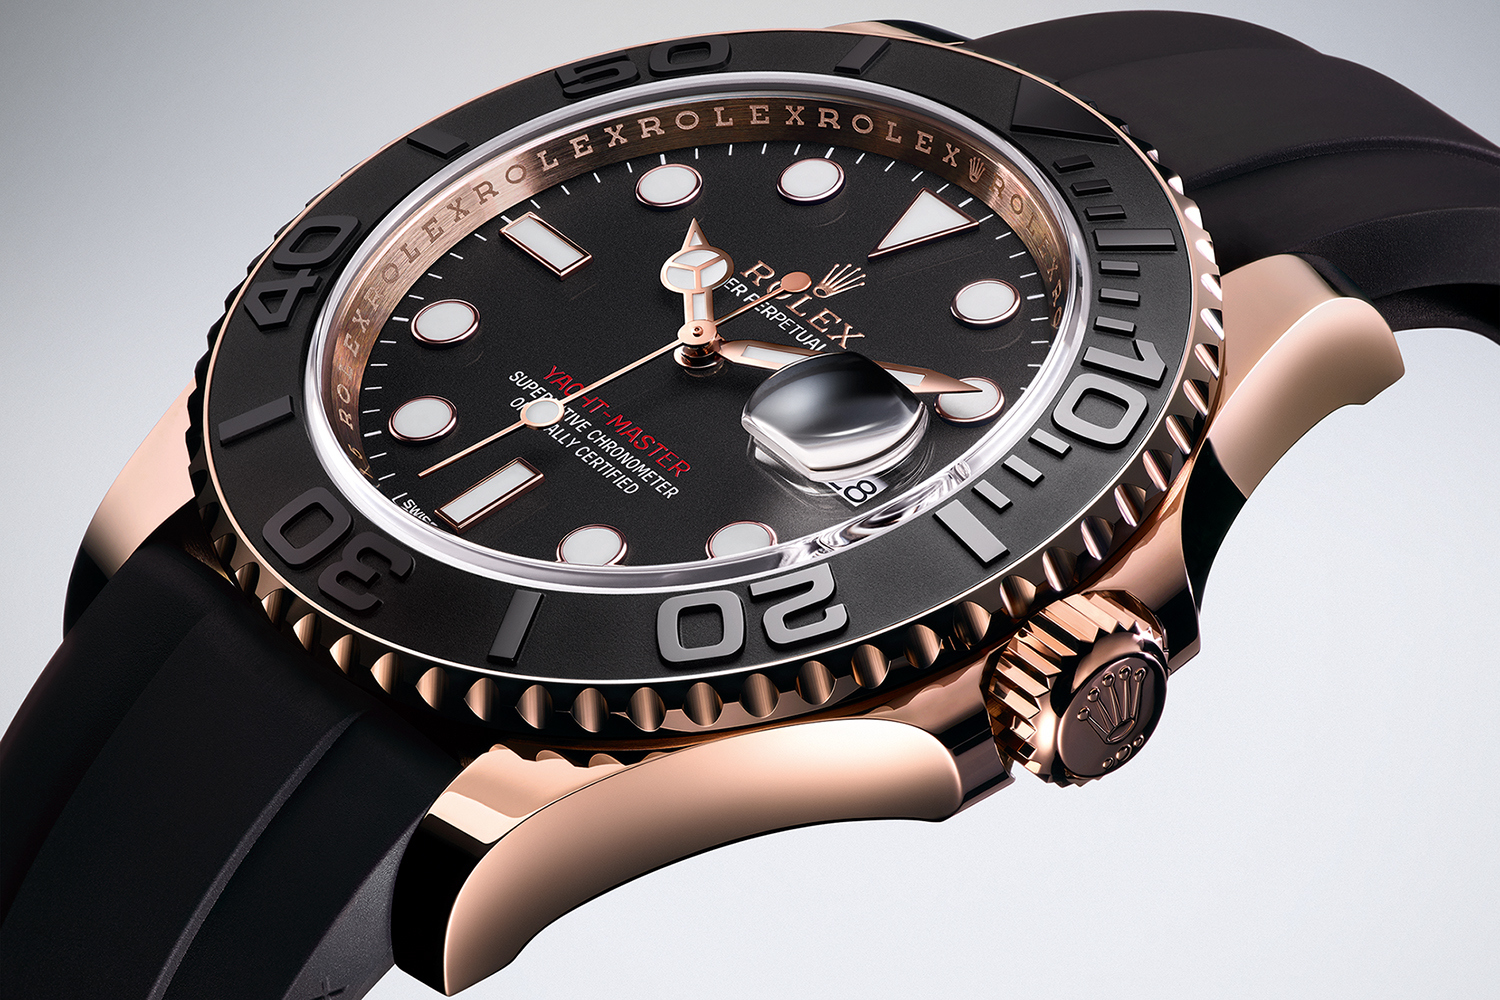 Why the Yacht Master Rolex is the Ultimate Luxury Watch for the Nautical Enthusiast